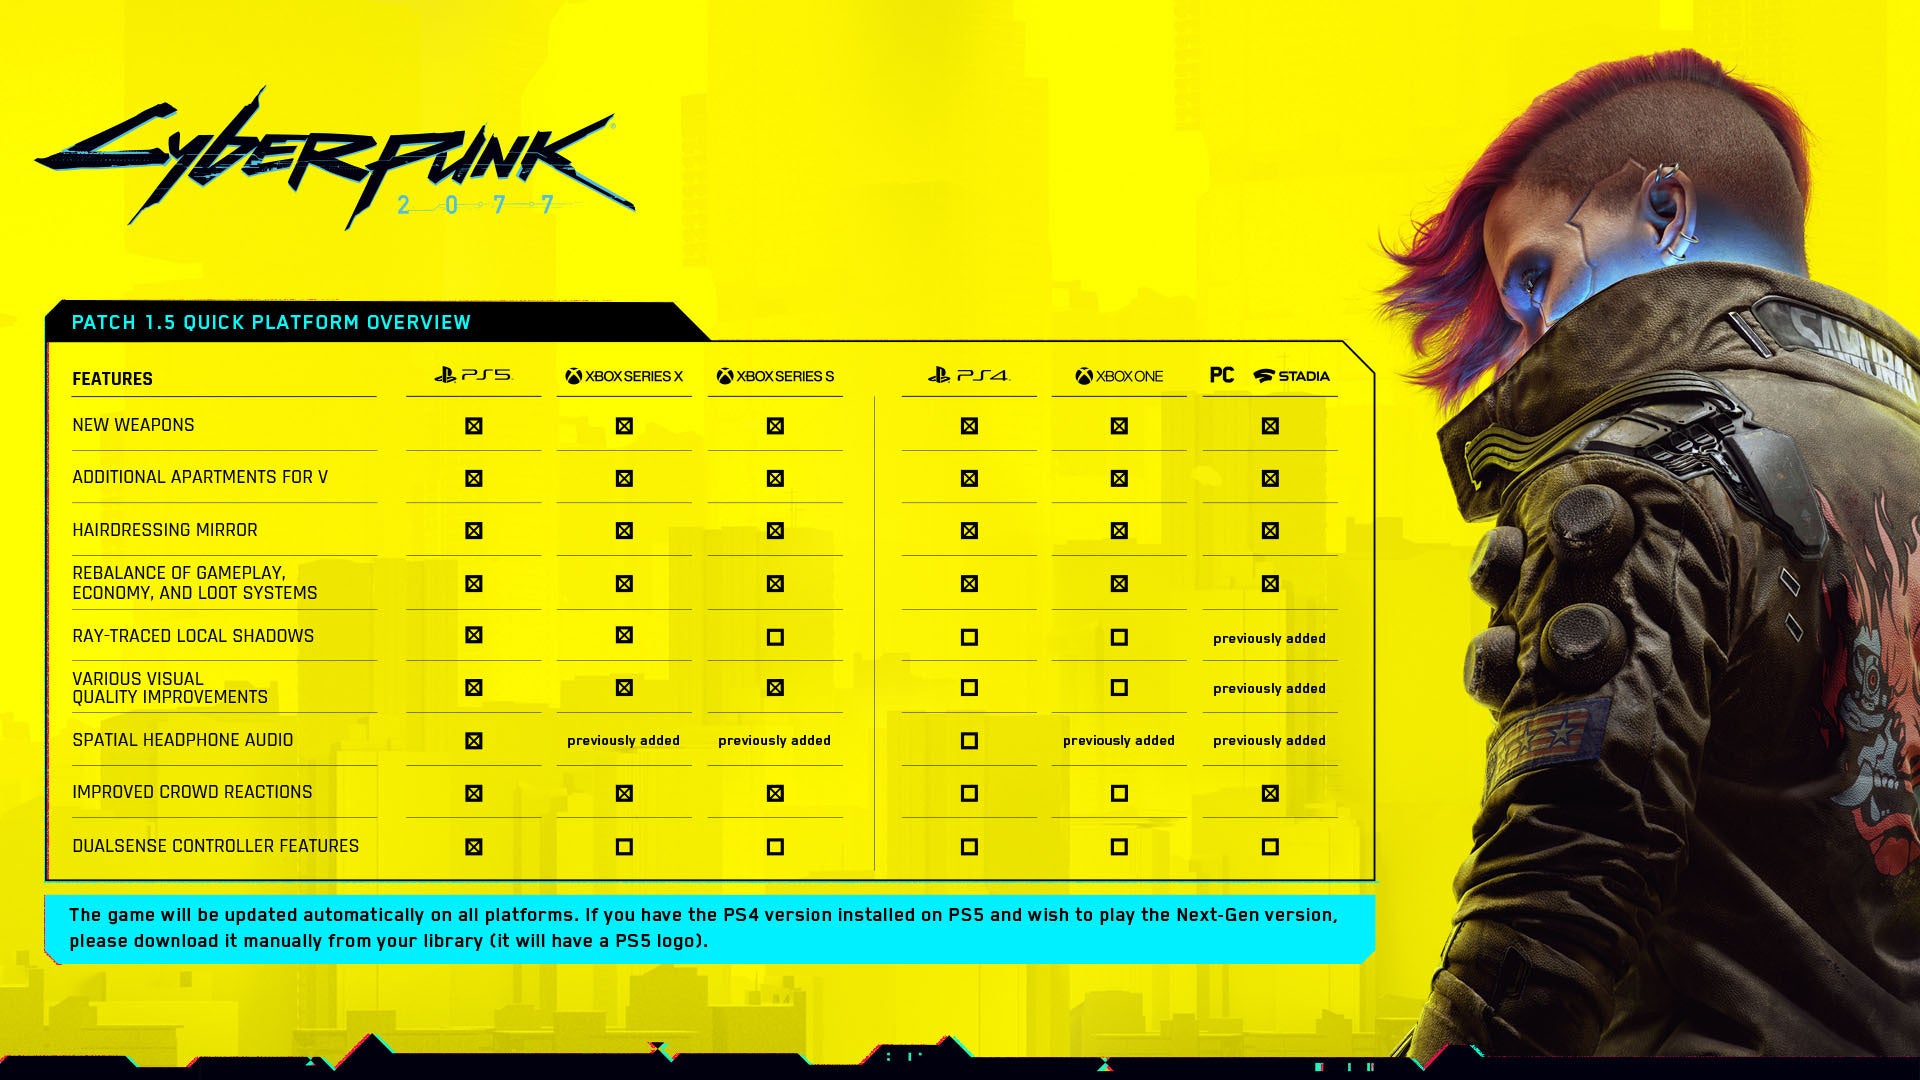 A chart explaining which features of Cyberpunk 2077 version 1.5 are on which platforms.